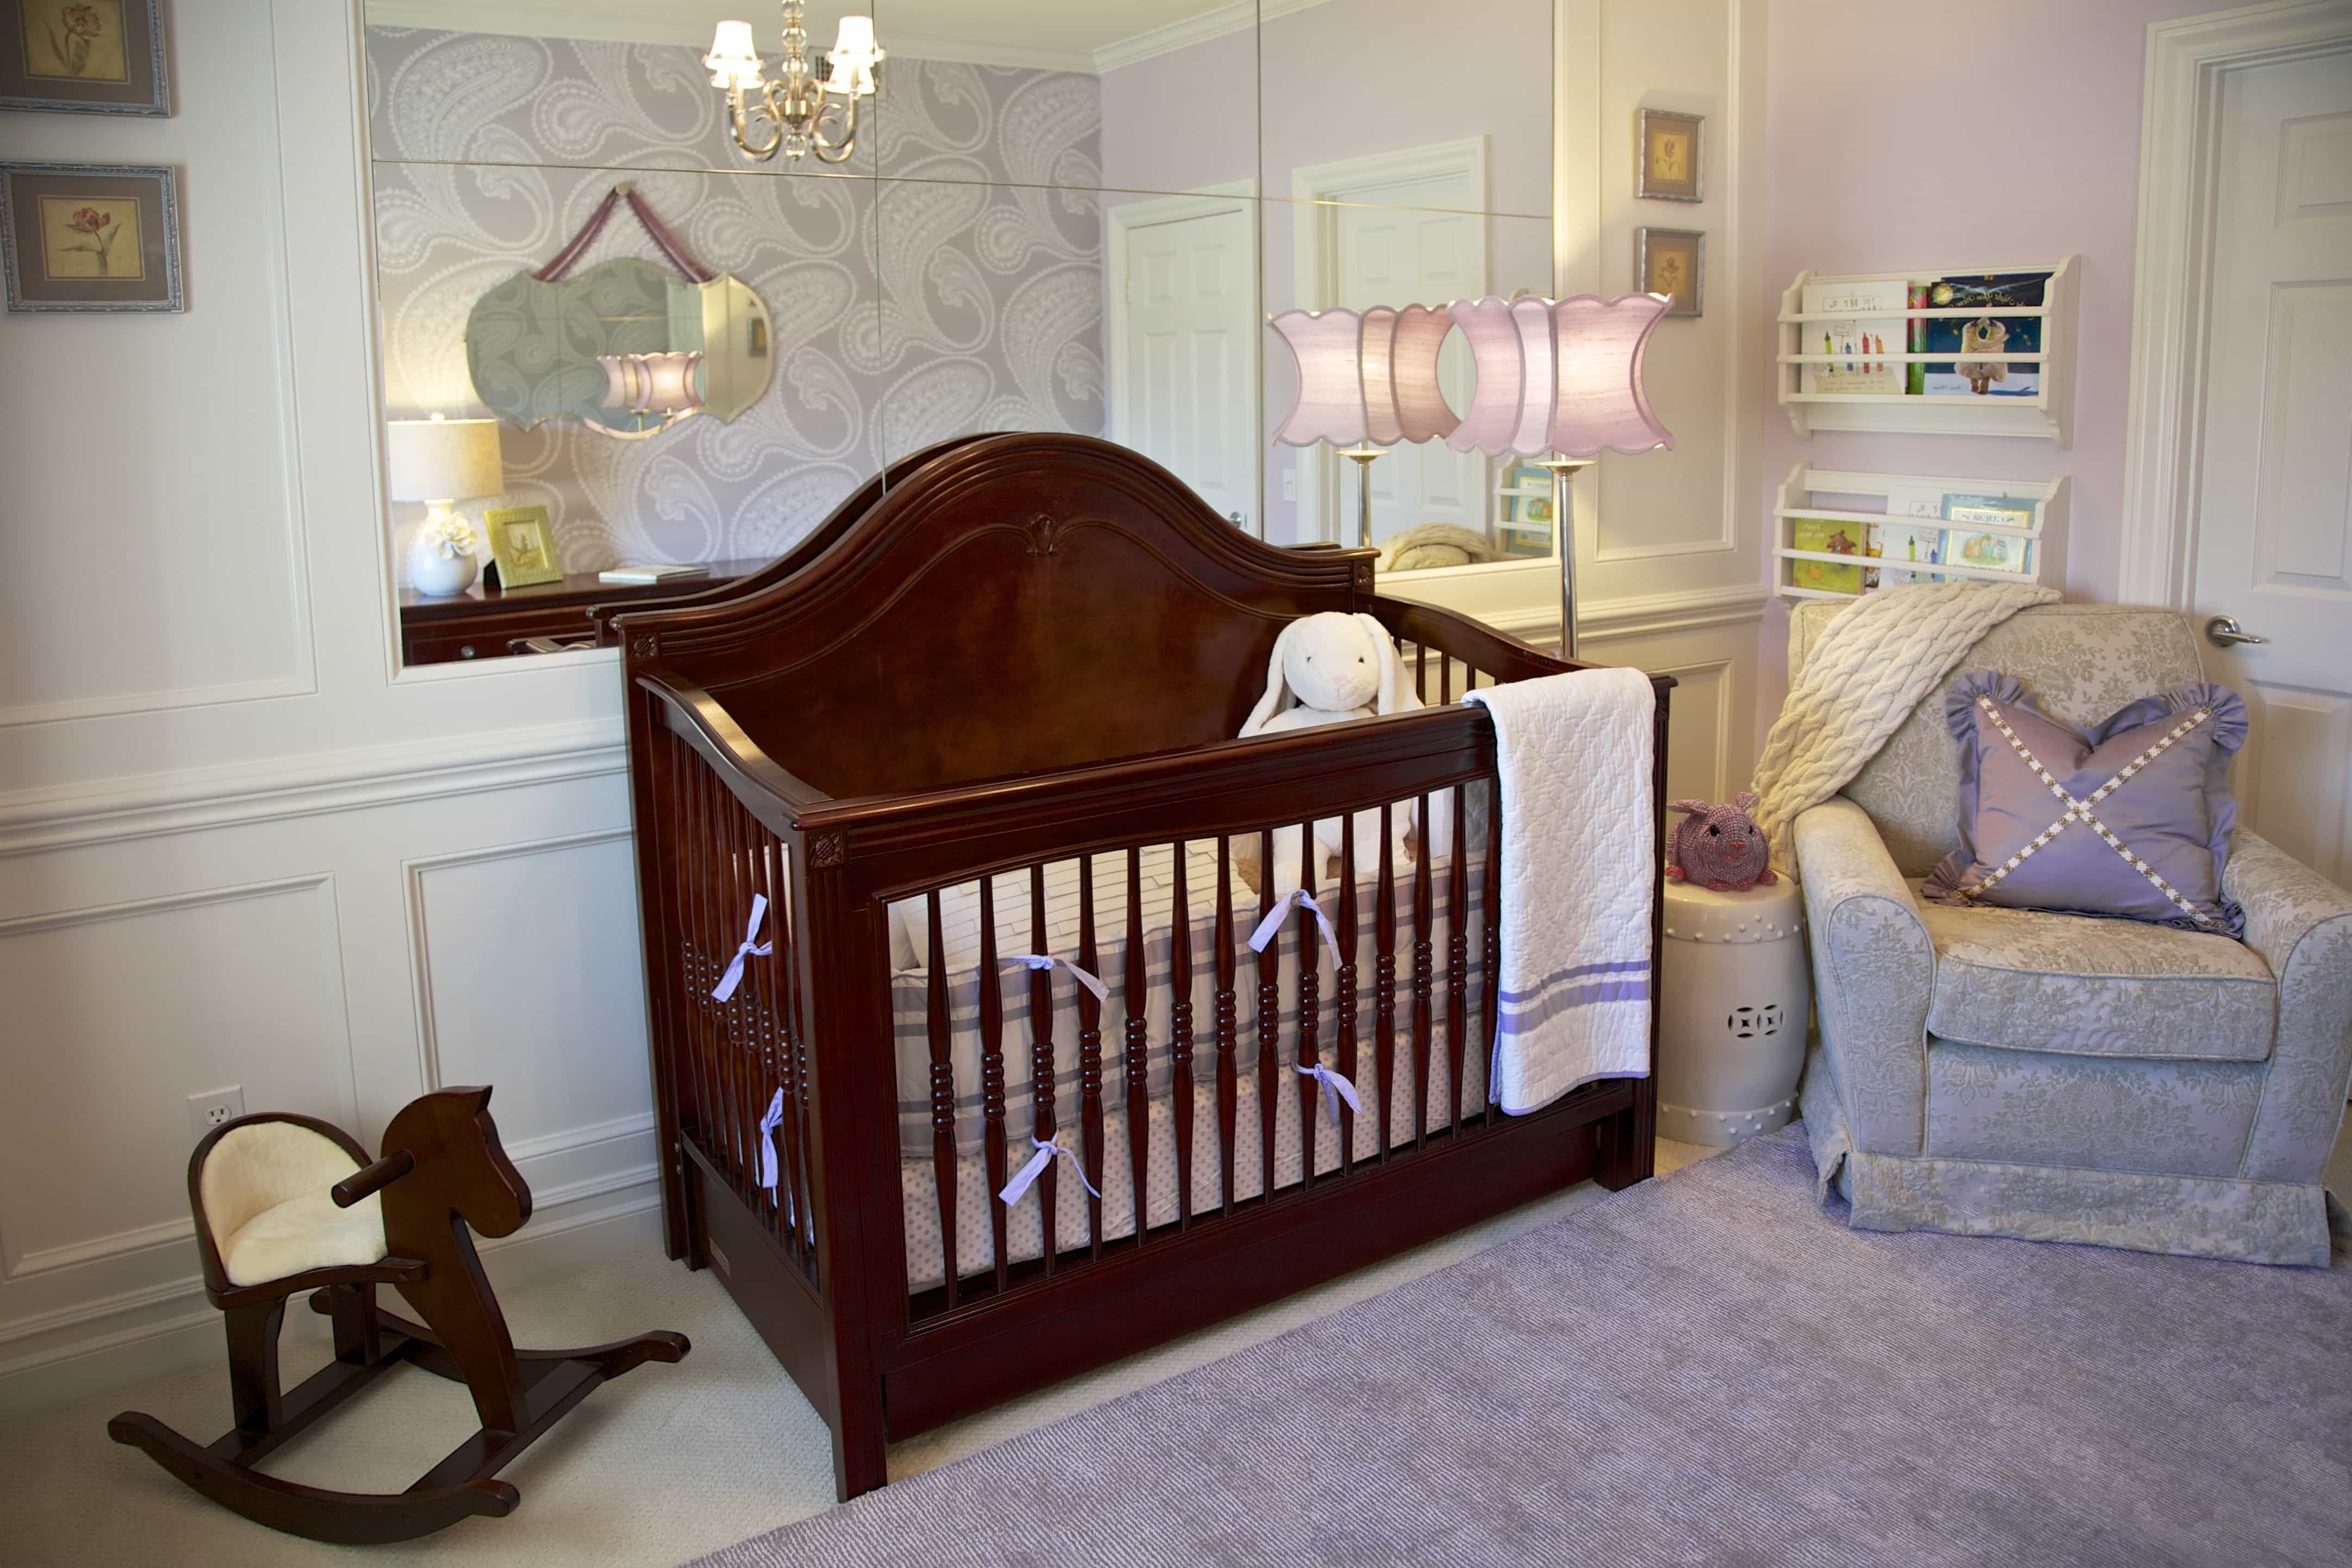 Cozy Baby Room Decoration With Decorative Wall Mirrors (View 29 of 33)